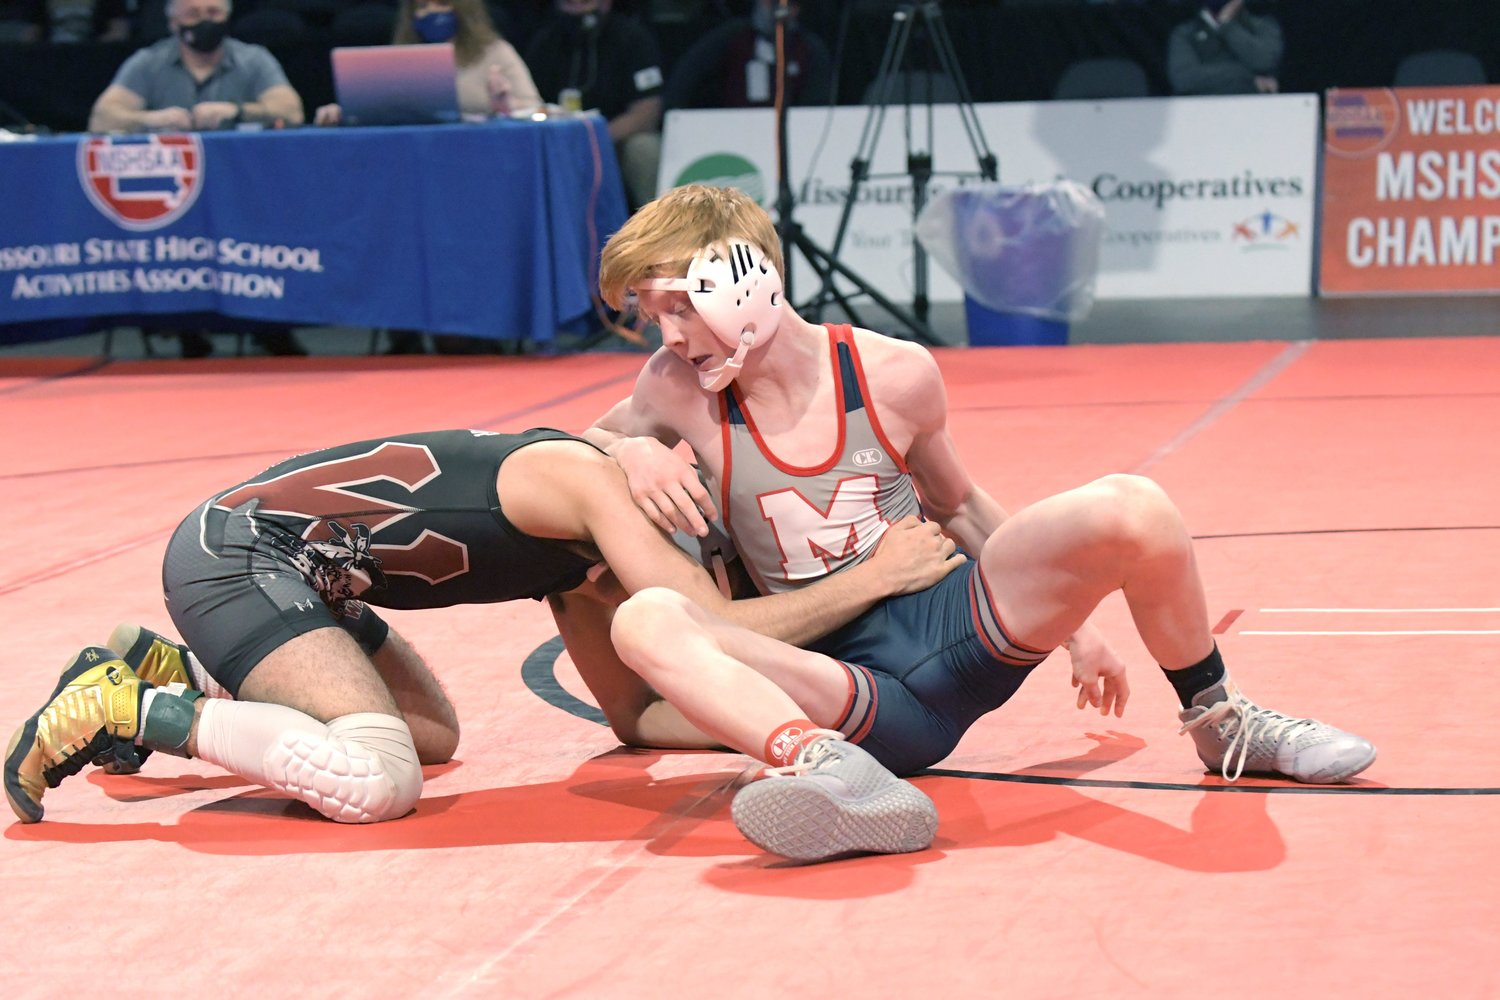 Moberly freshman Nick Kessler, right, works to escape the grasp of a 106-pound opponent he faced Thursday at the 2021 MSHSAA Class 2 Boys Wrestling Championships held in Independence. Kessler won his first round match, then lost the next two in this double elimination tournament.